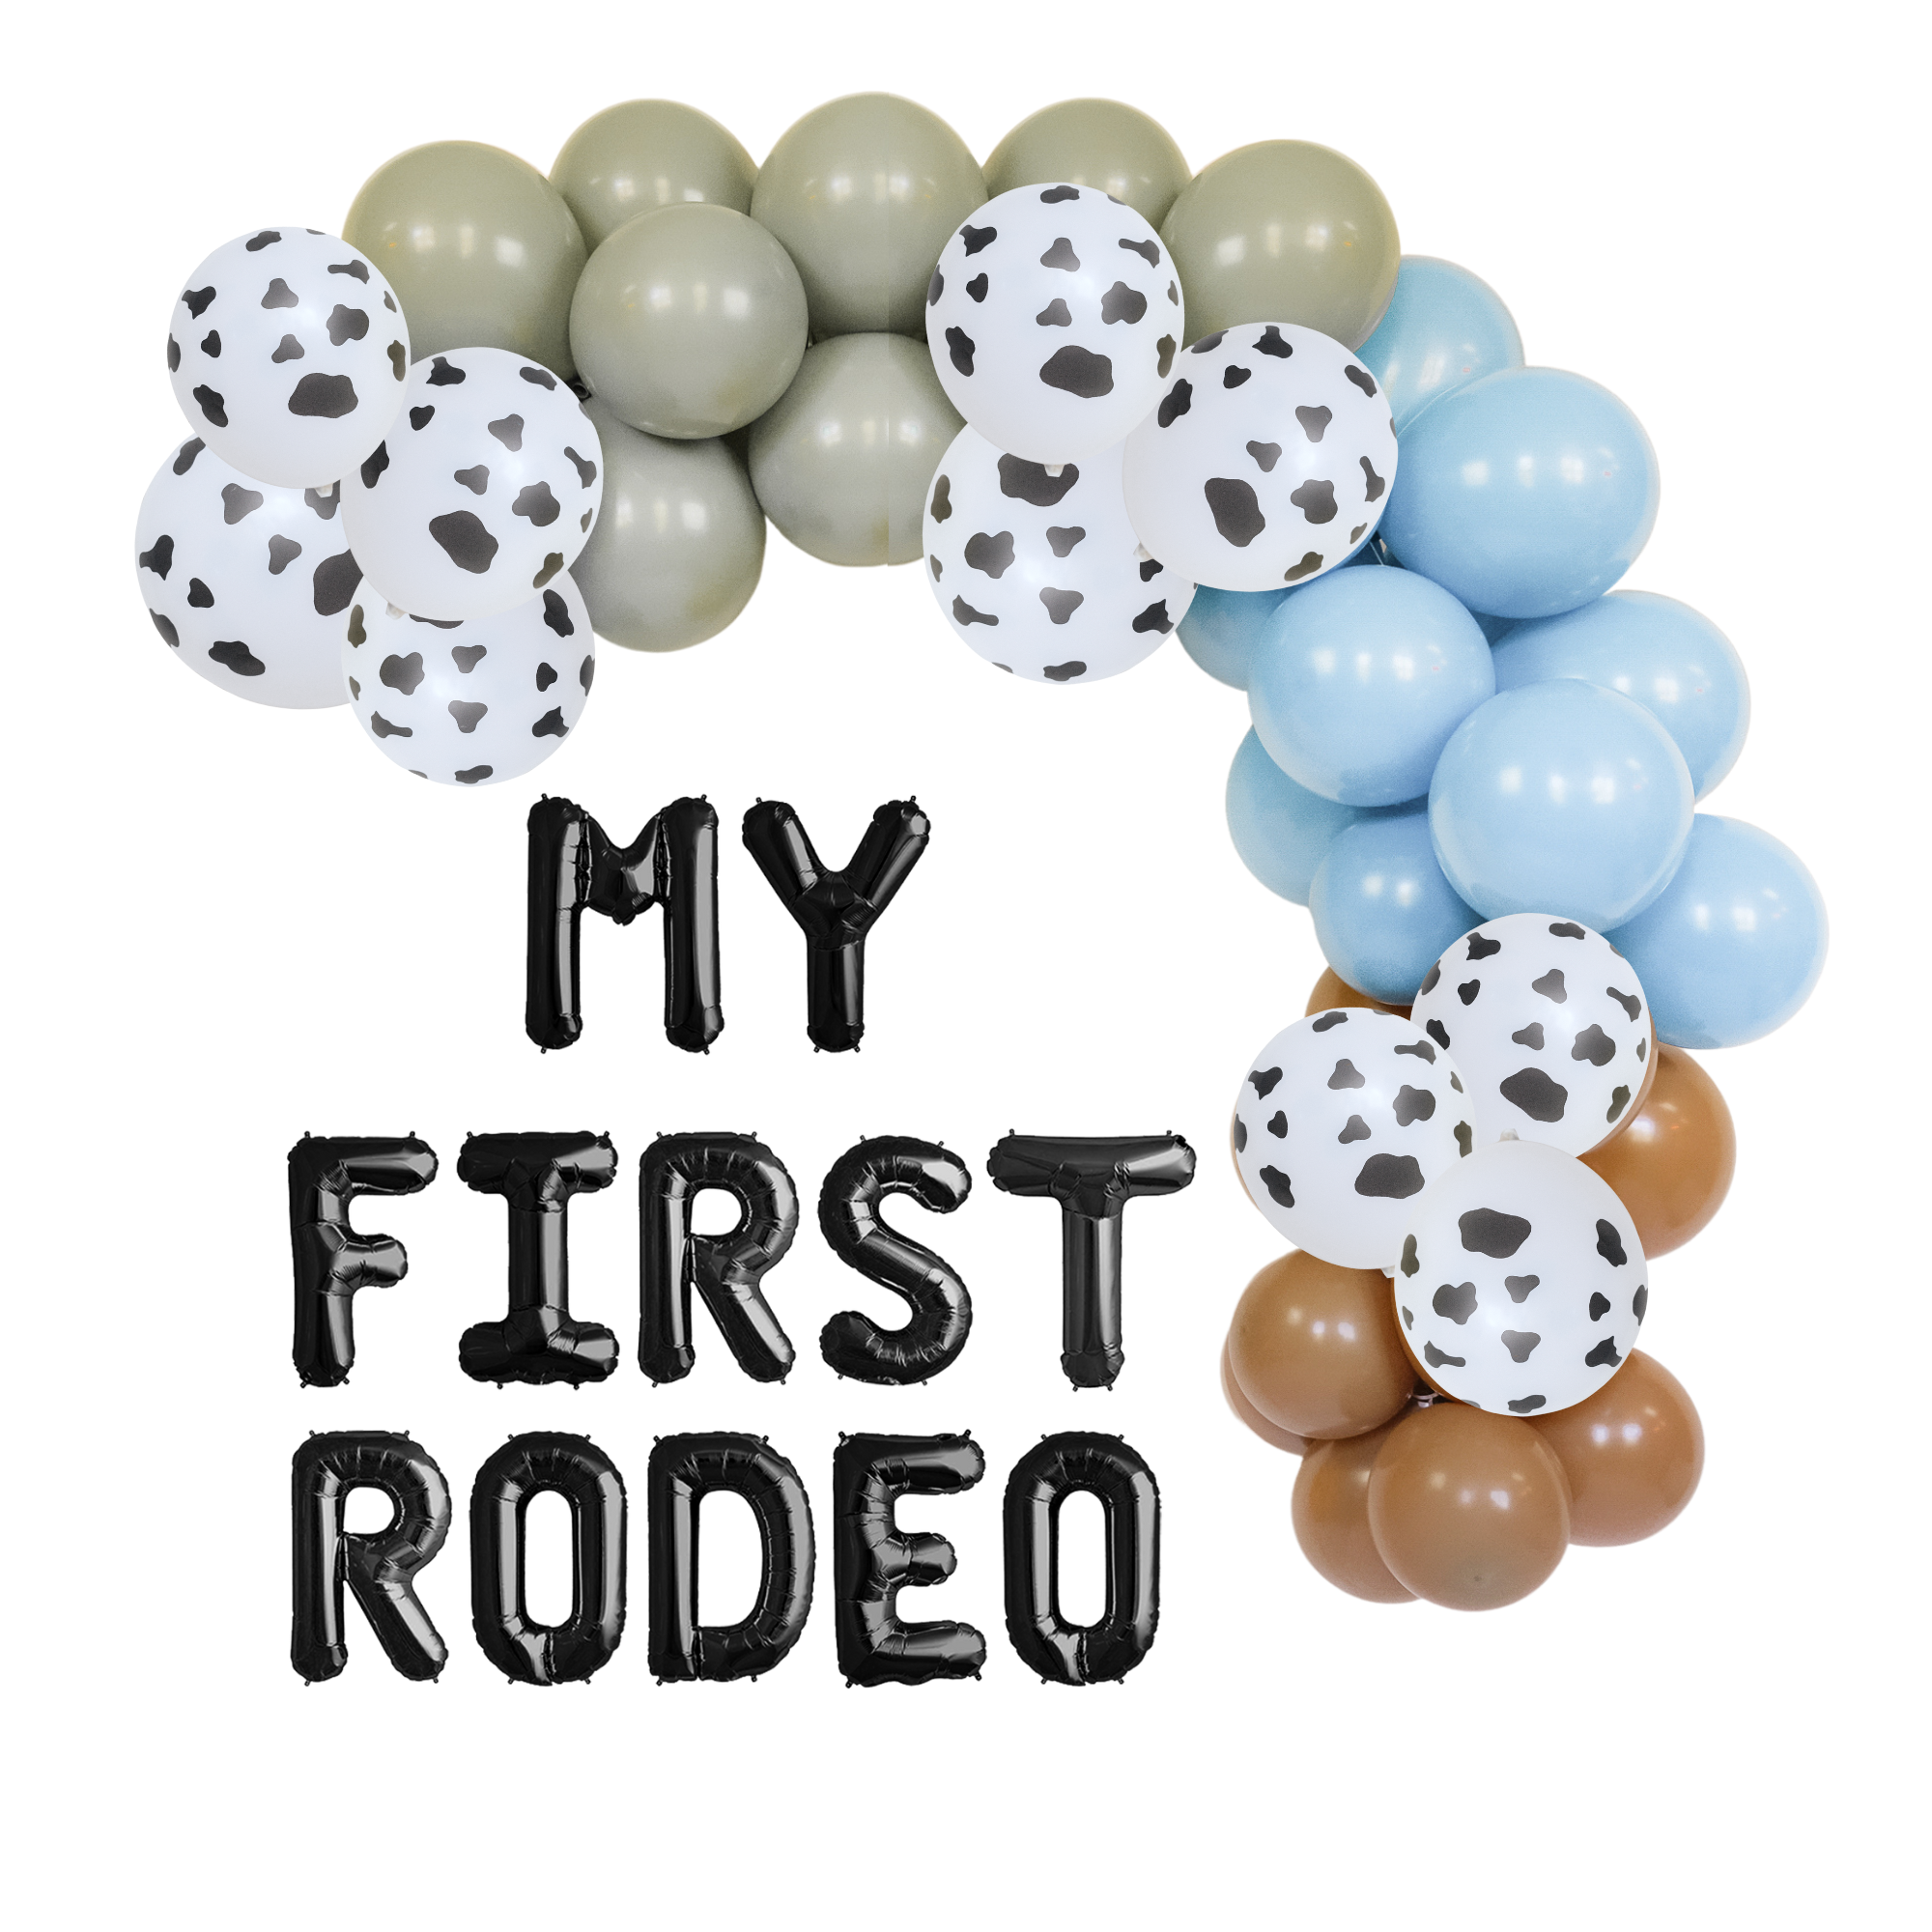 First Rodeo Birthday Decorations Balloon Arch/Garland